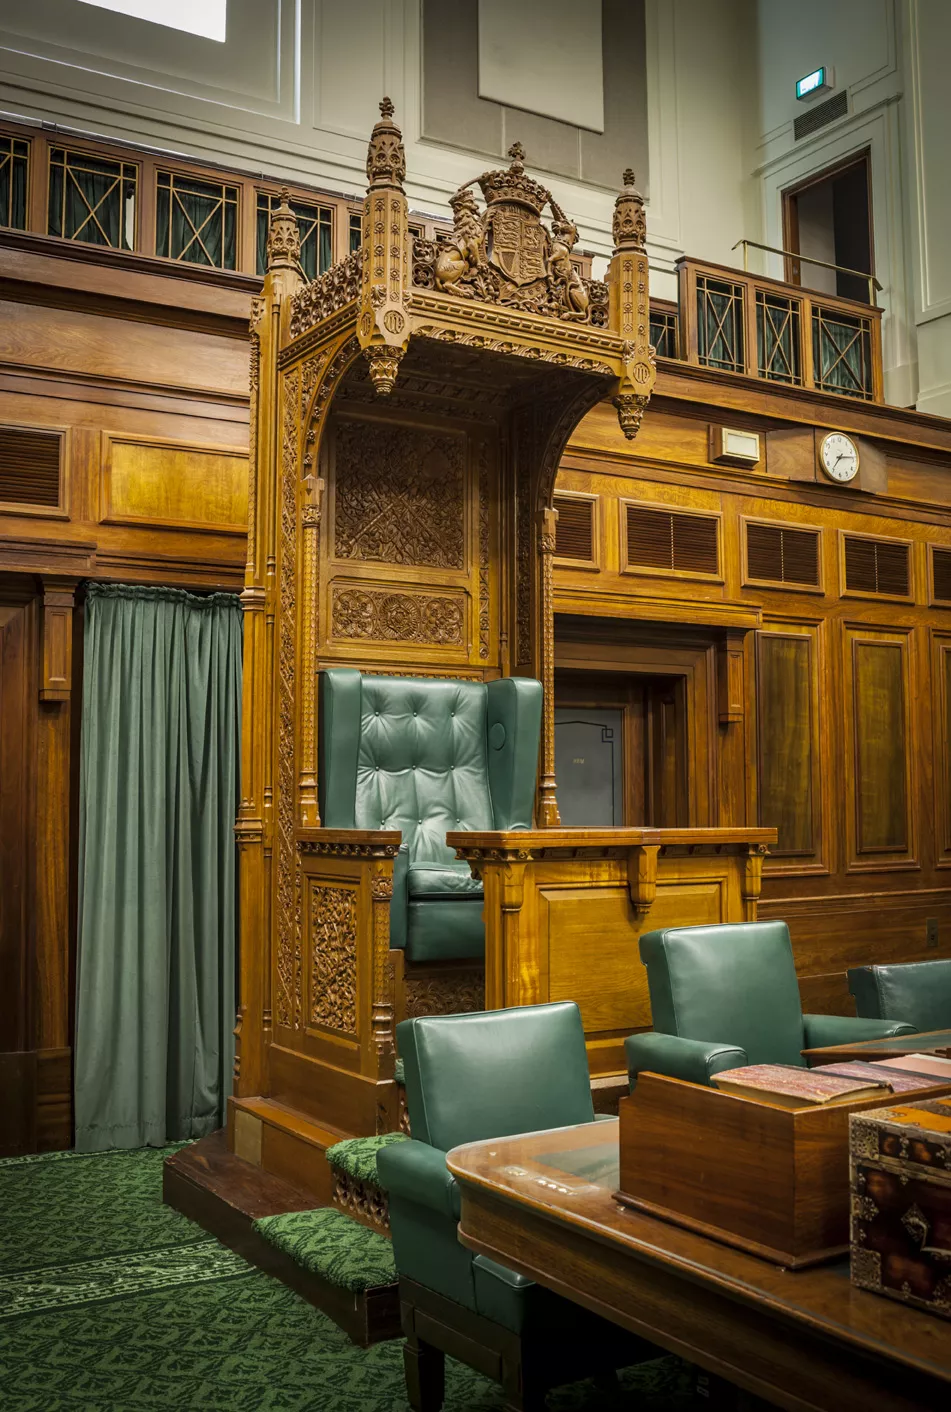 The Speaker's Chair is a large wooden ornate chair with green leather.